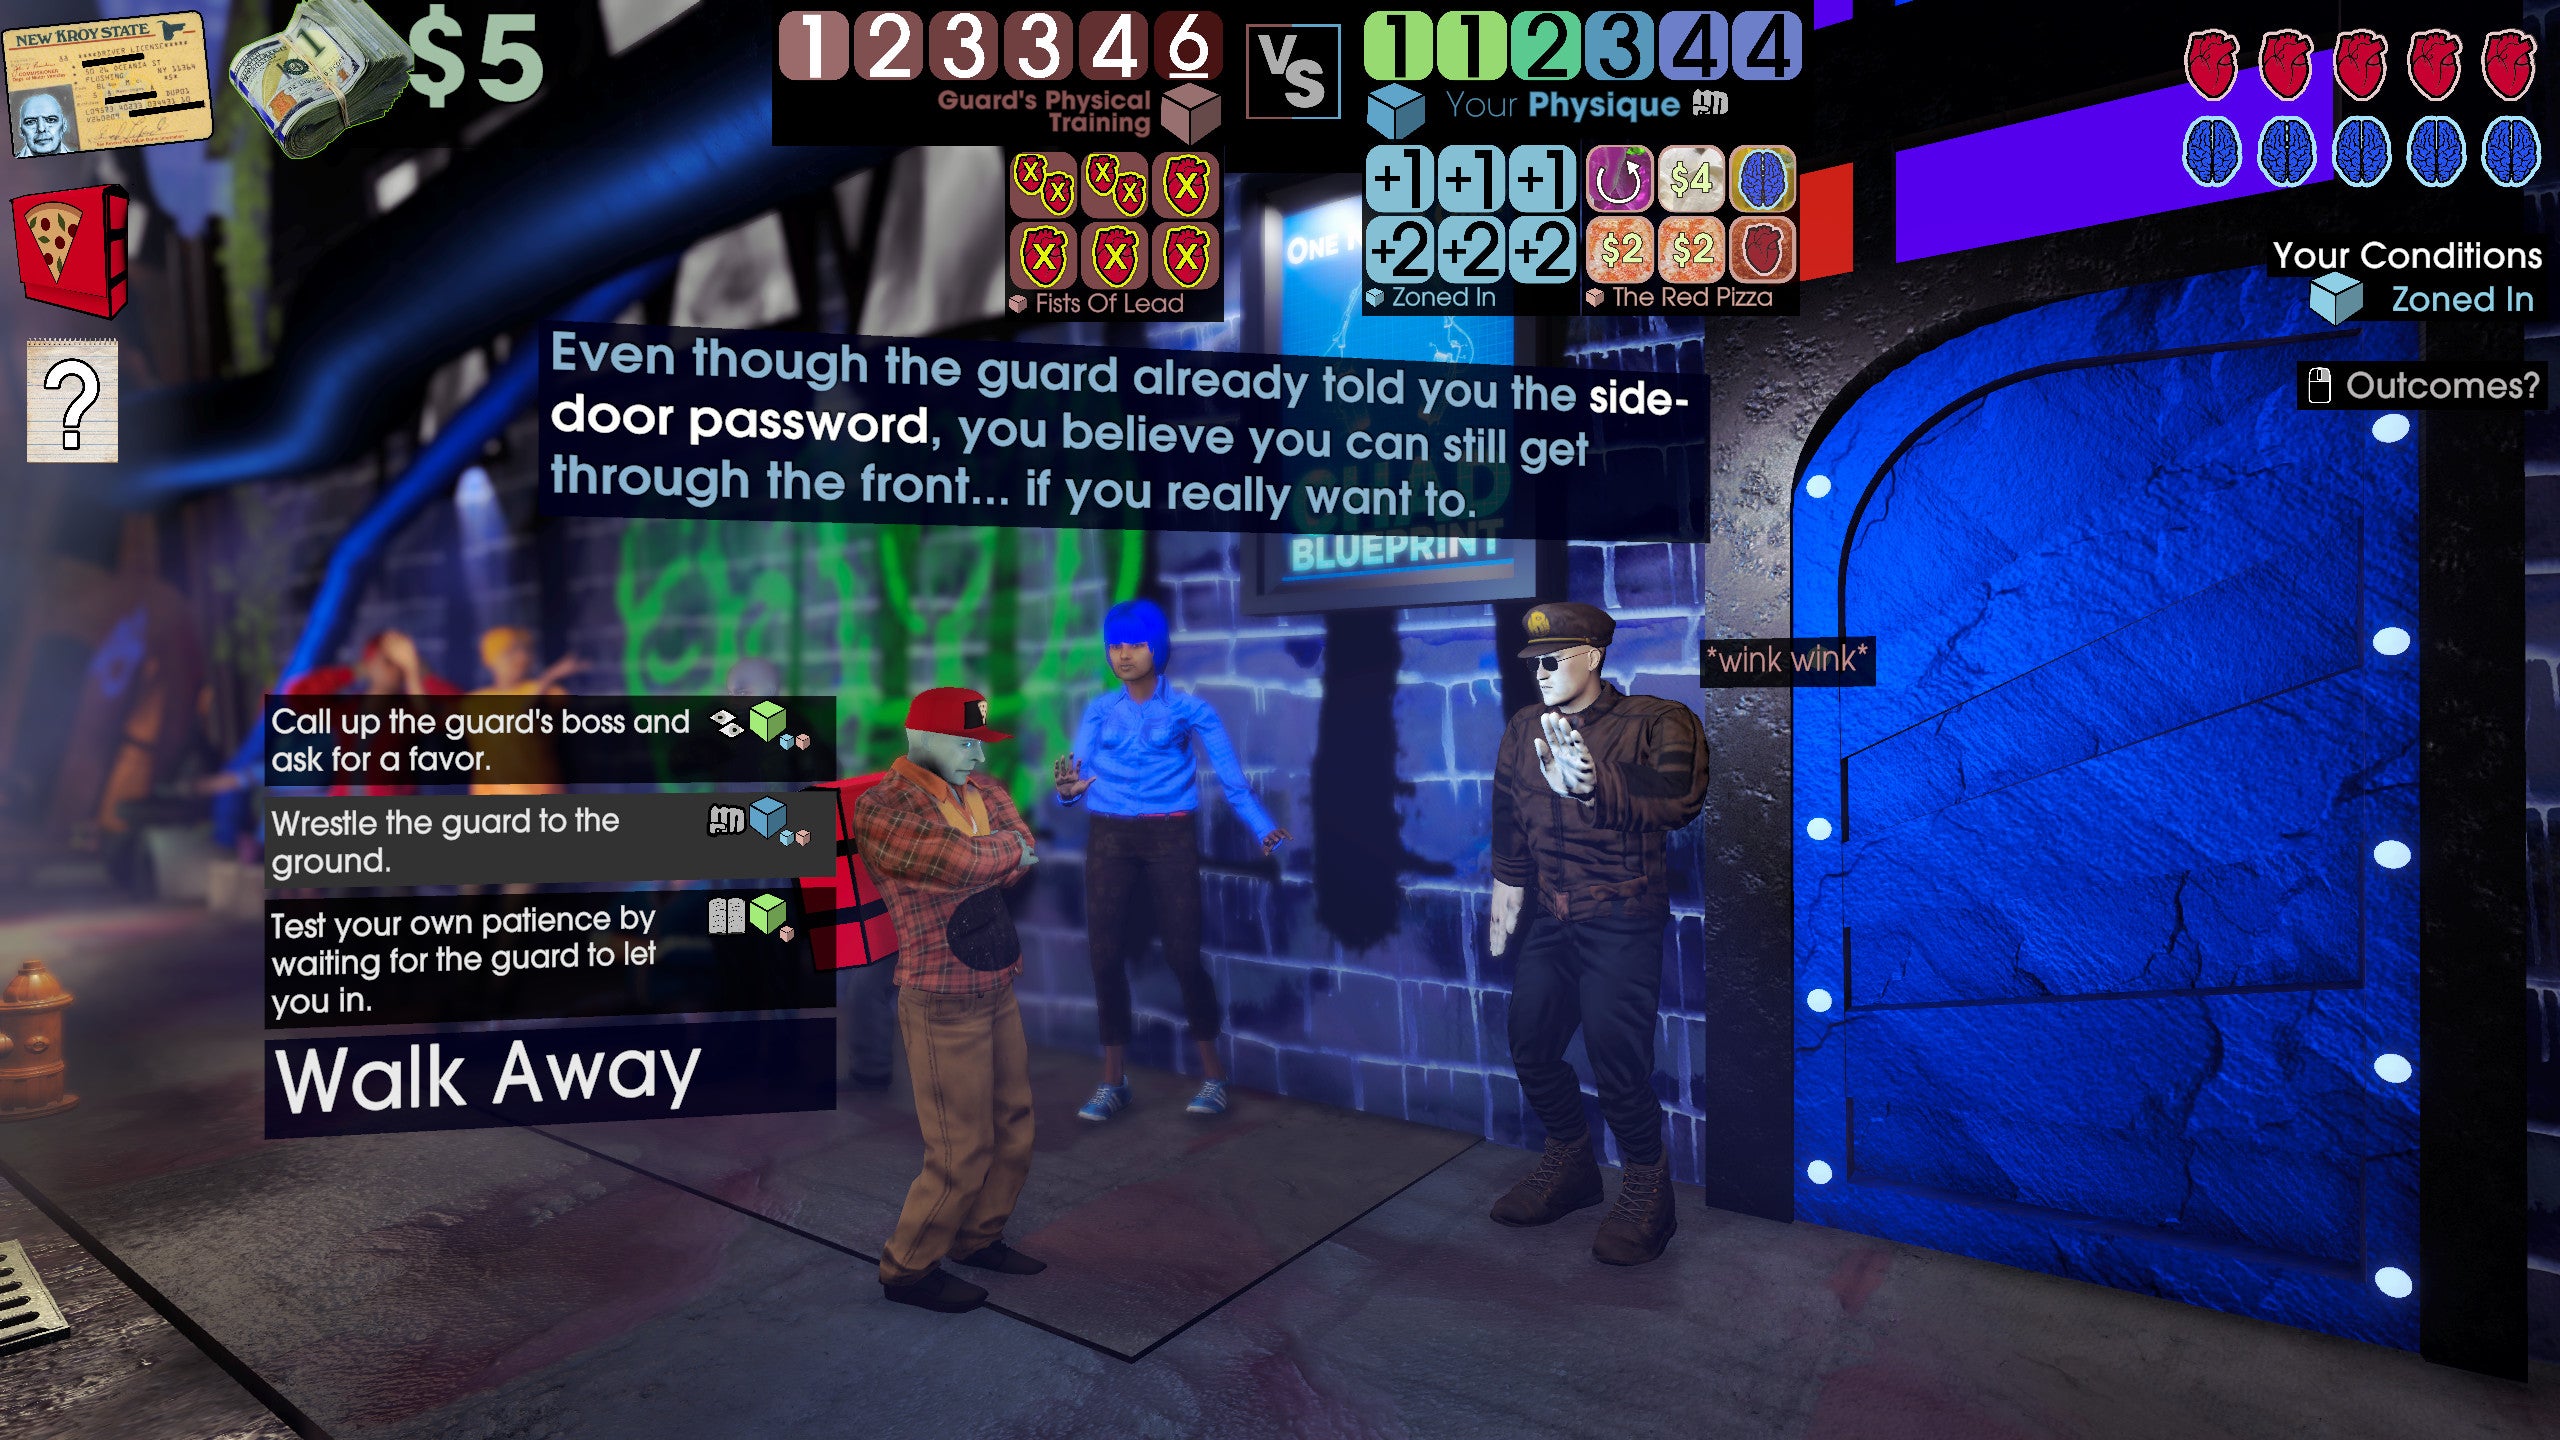 Considering wrestling the bouncer in a Betrayal At Club Low screenshot.